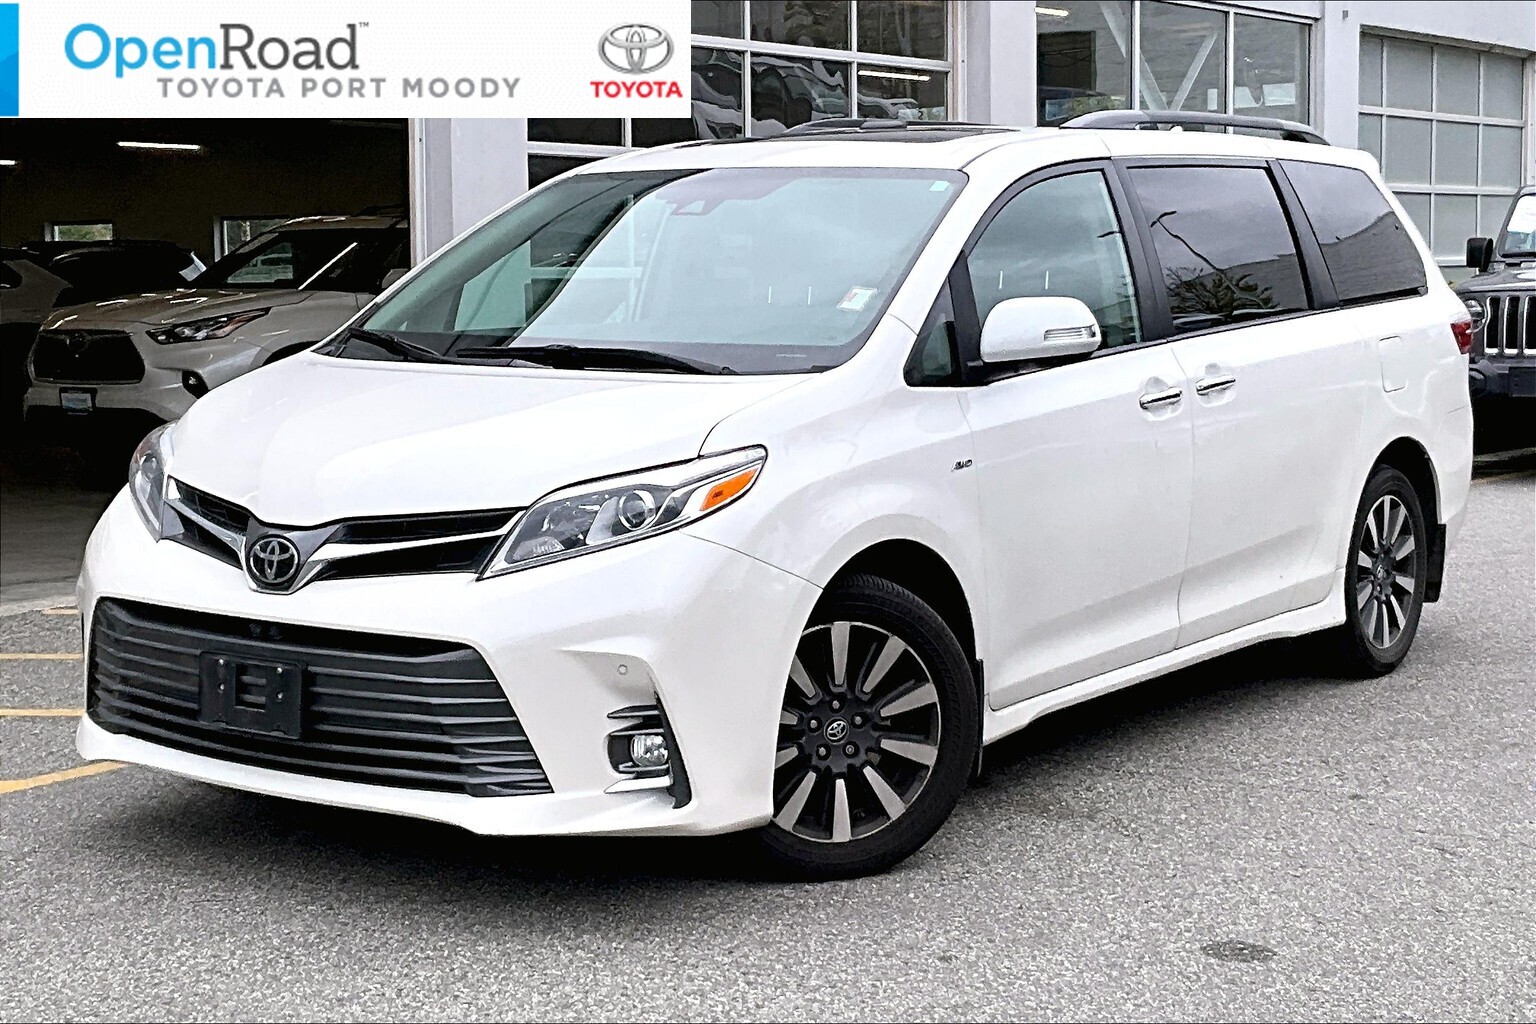 2020 Toyota Sienna XLE AWD 7-Passenger V6 |OpenRoad True Price |Local